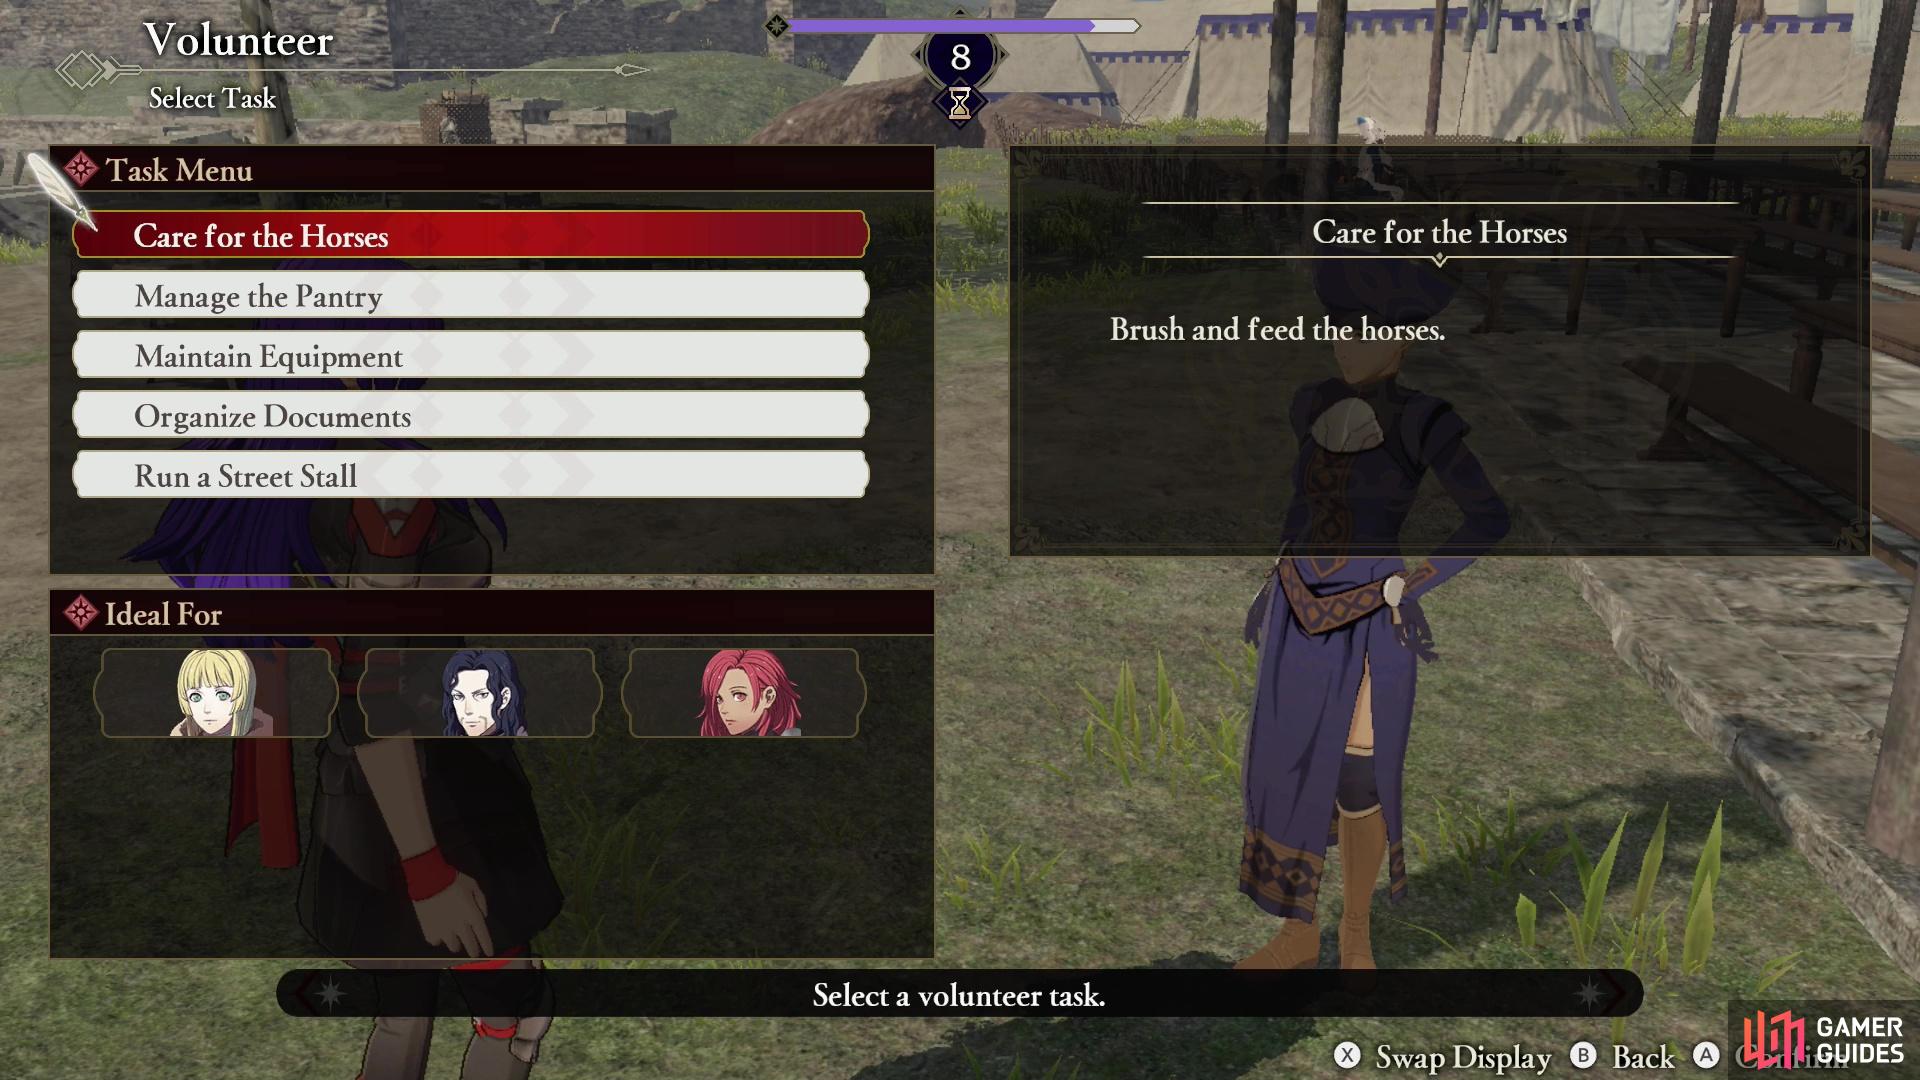 Some characters are more inclined towards different chores, as seen at the bottom left of the screen during the chore selection menu.